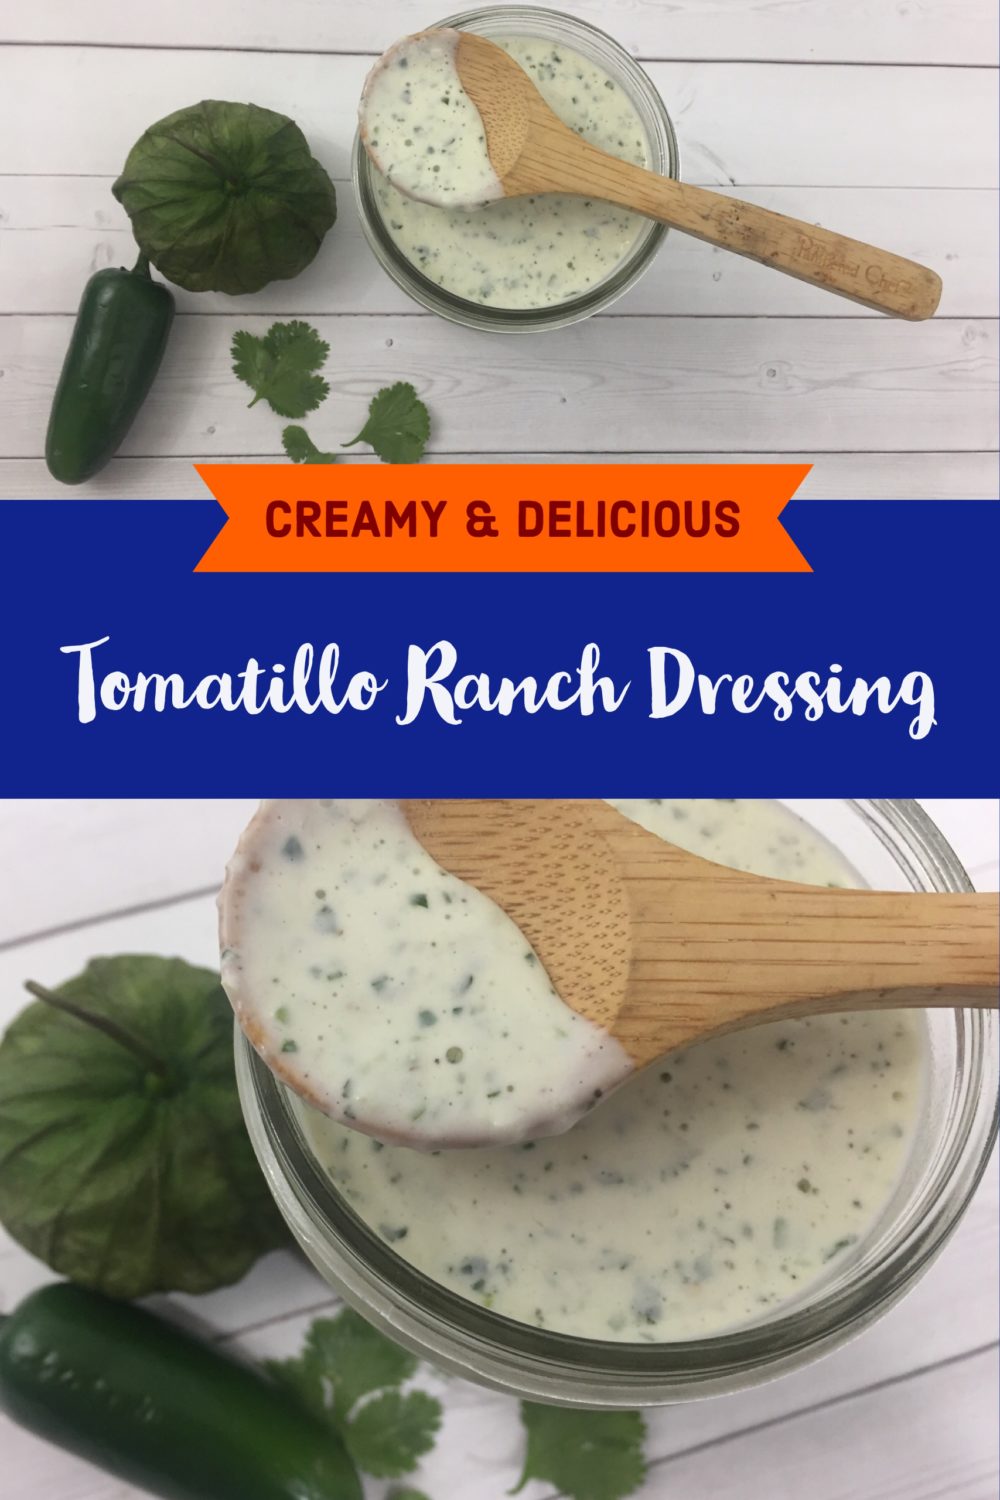 Tomatillo Ranch Dressing Video and Recipe plus a recipe for Pulled Pork and Tomatillo Ranch Hot Dogs